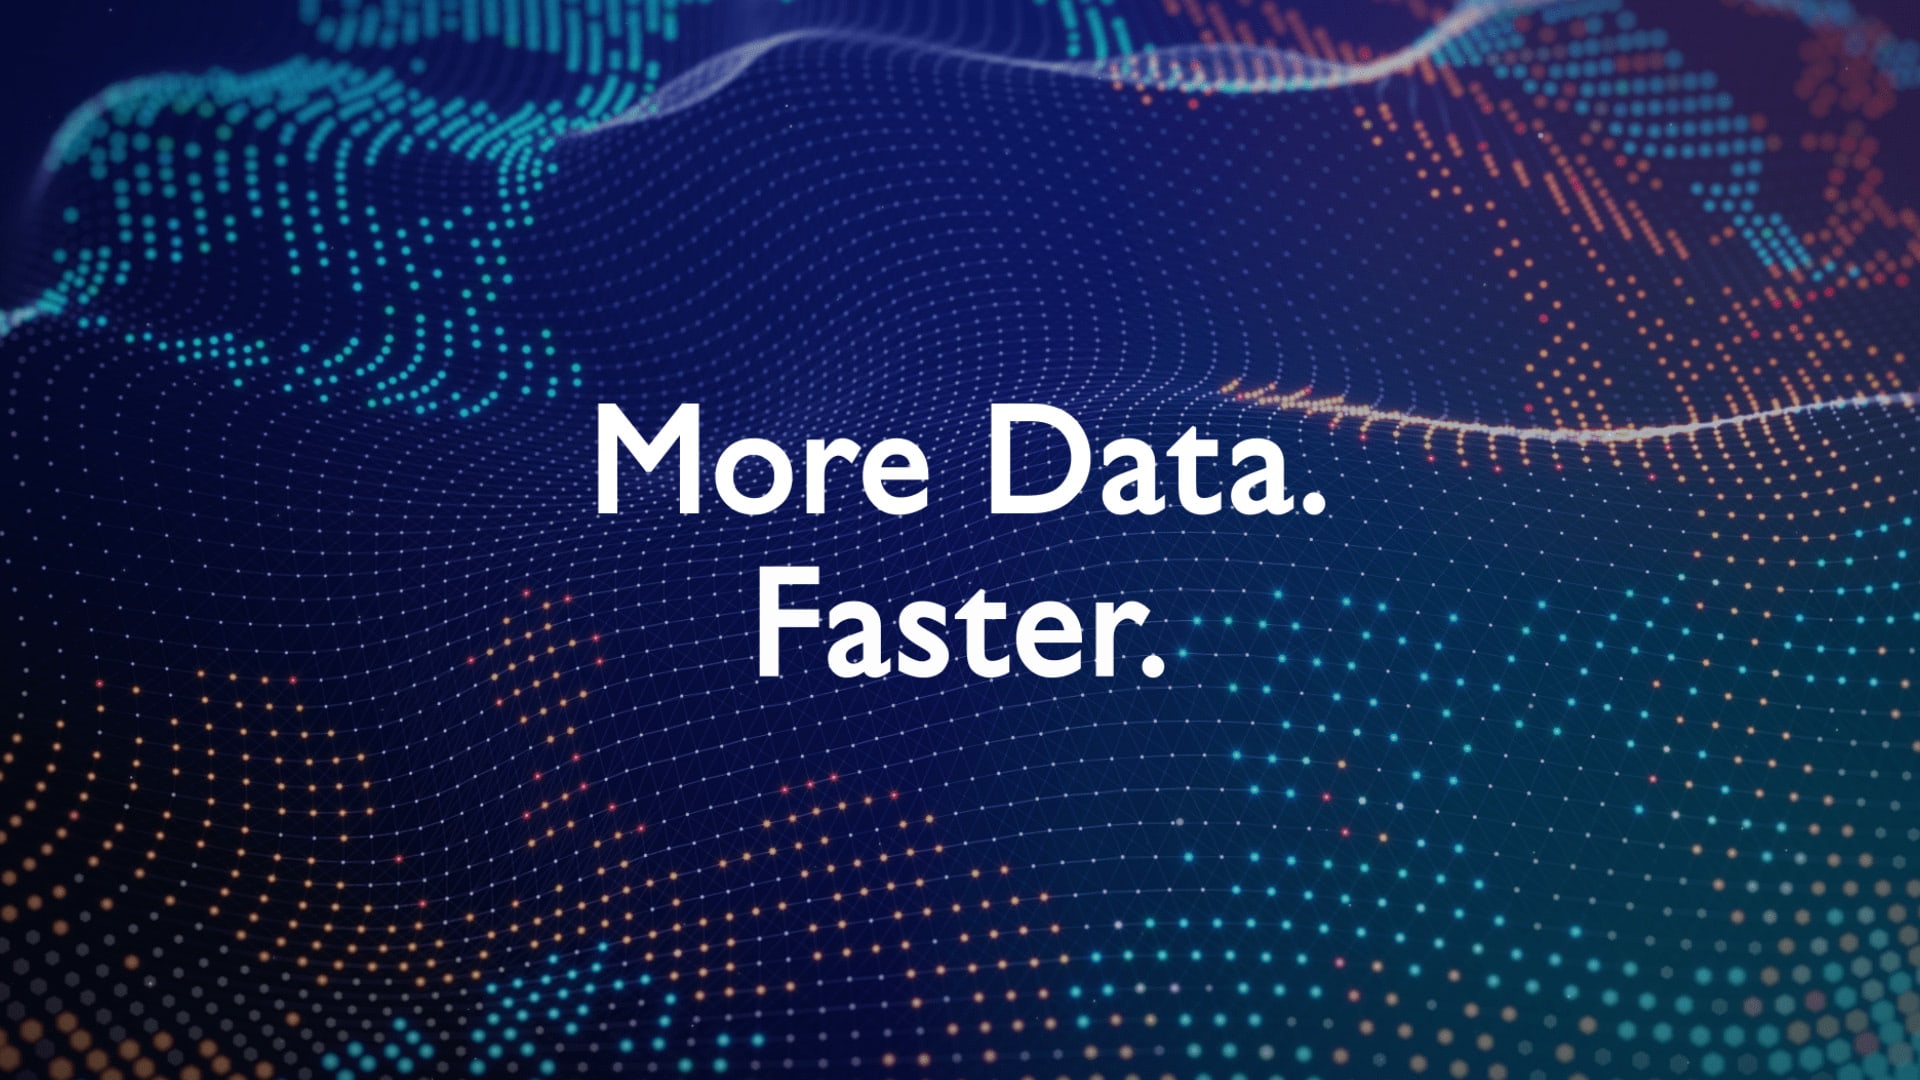 More data faster